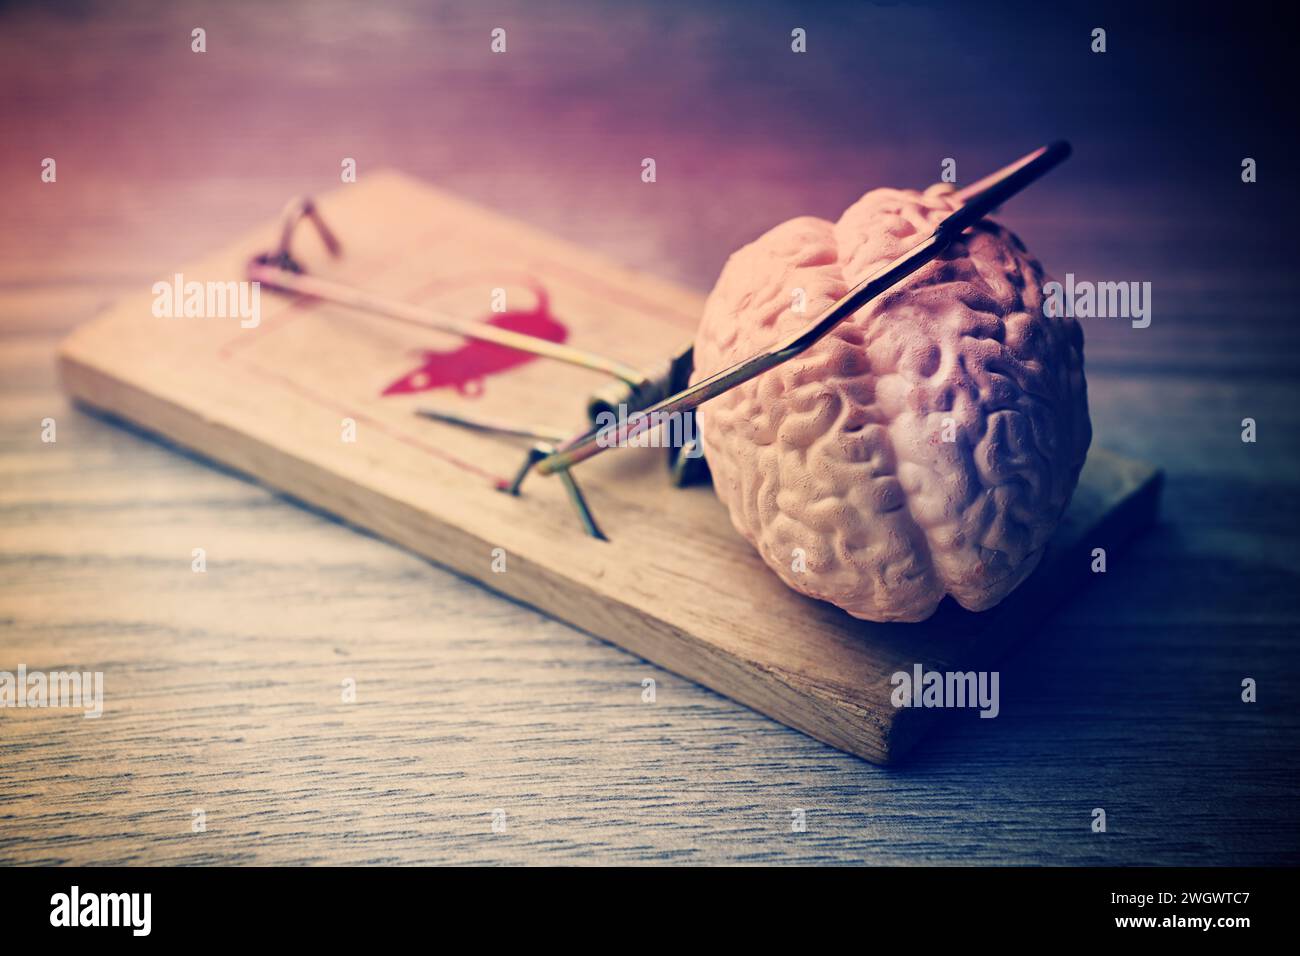 Brain In The Mouse Trap Stock Photo